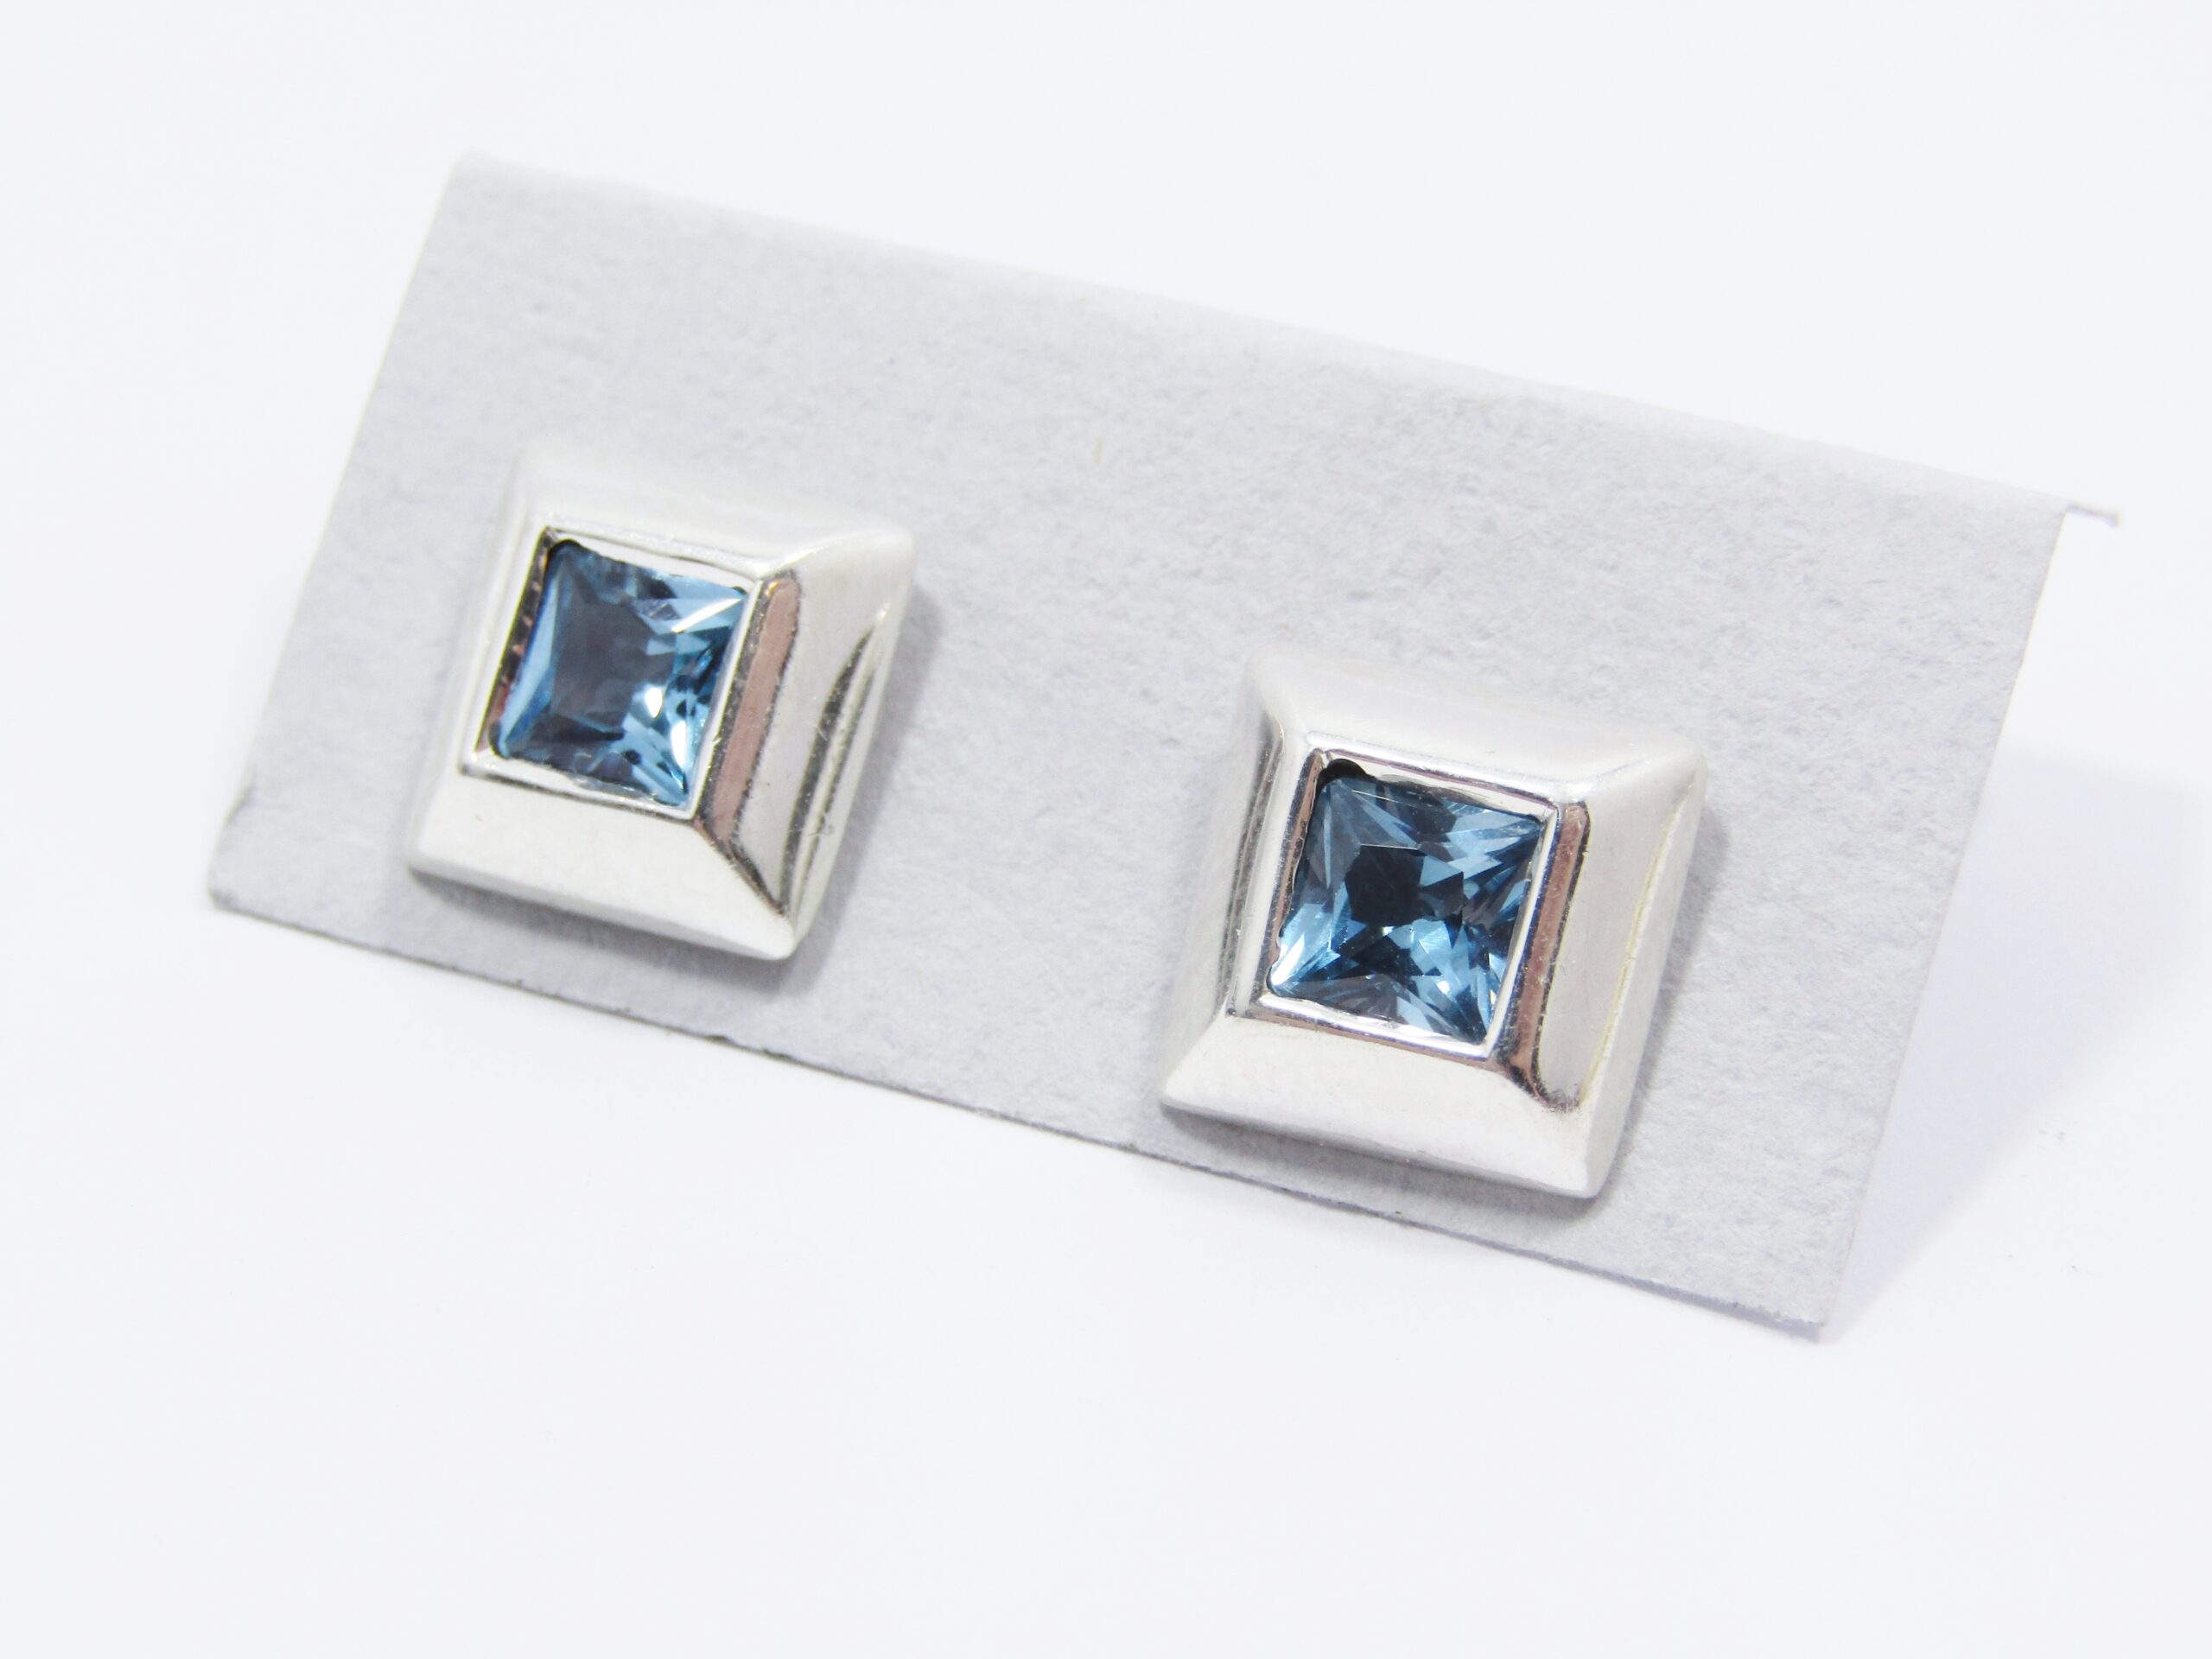 A Gorgeous Pair of Square Blue Zirconia Earrings in Sterling Silver